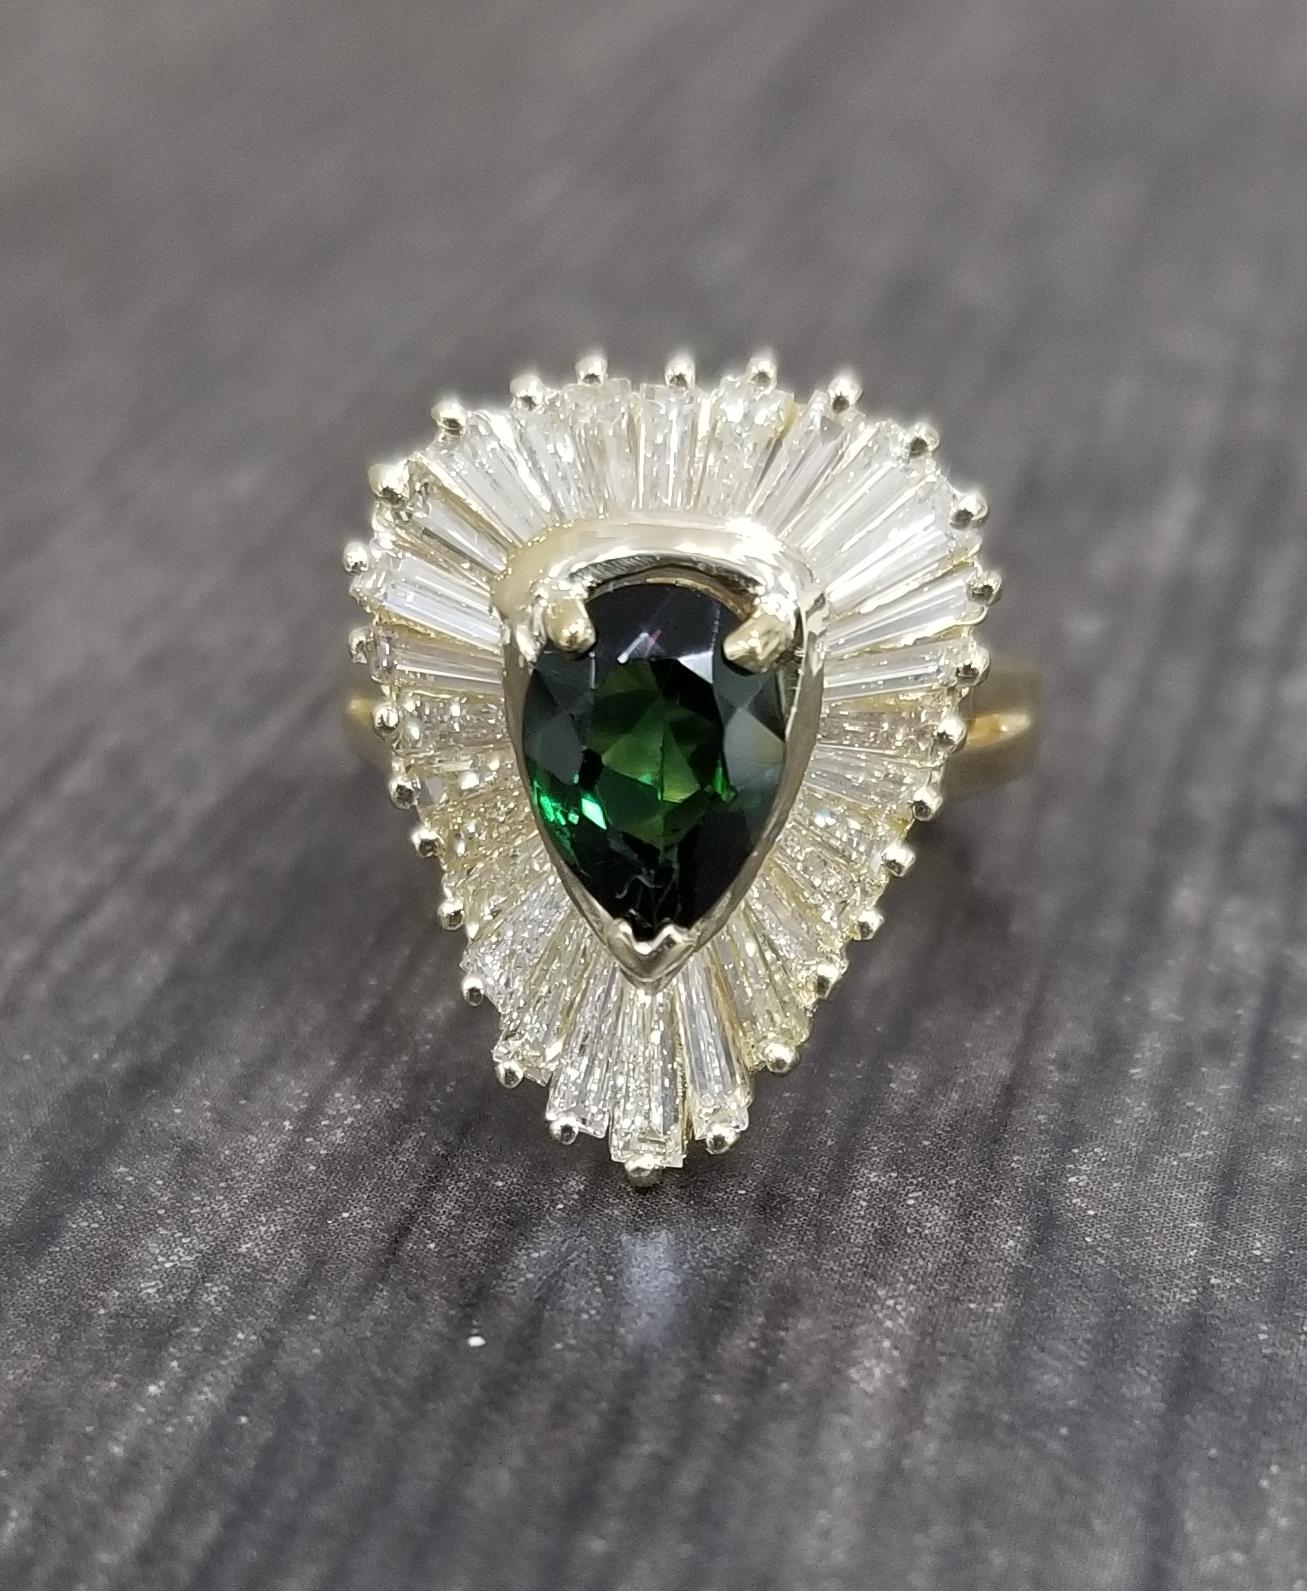 18k yellow gold ladies diamond baguette cocktail ring containing 1 pear shape green tourmaline weighing 1.09cts. and 28 baguette cut diamonds of very fine quality weighing 1.75cts. set in a 